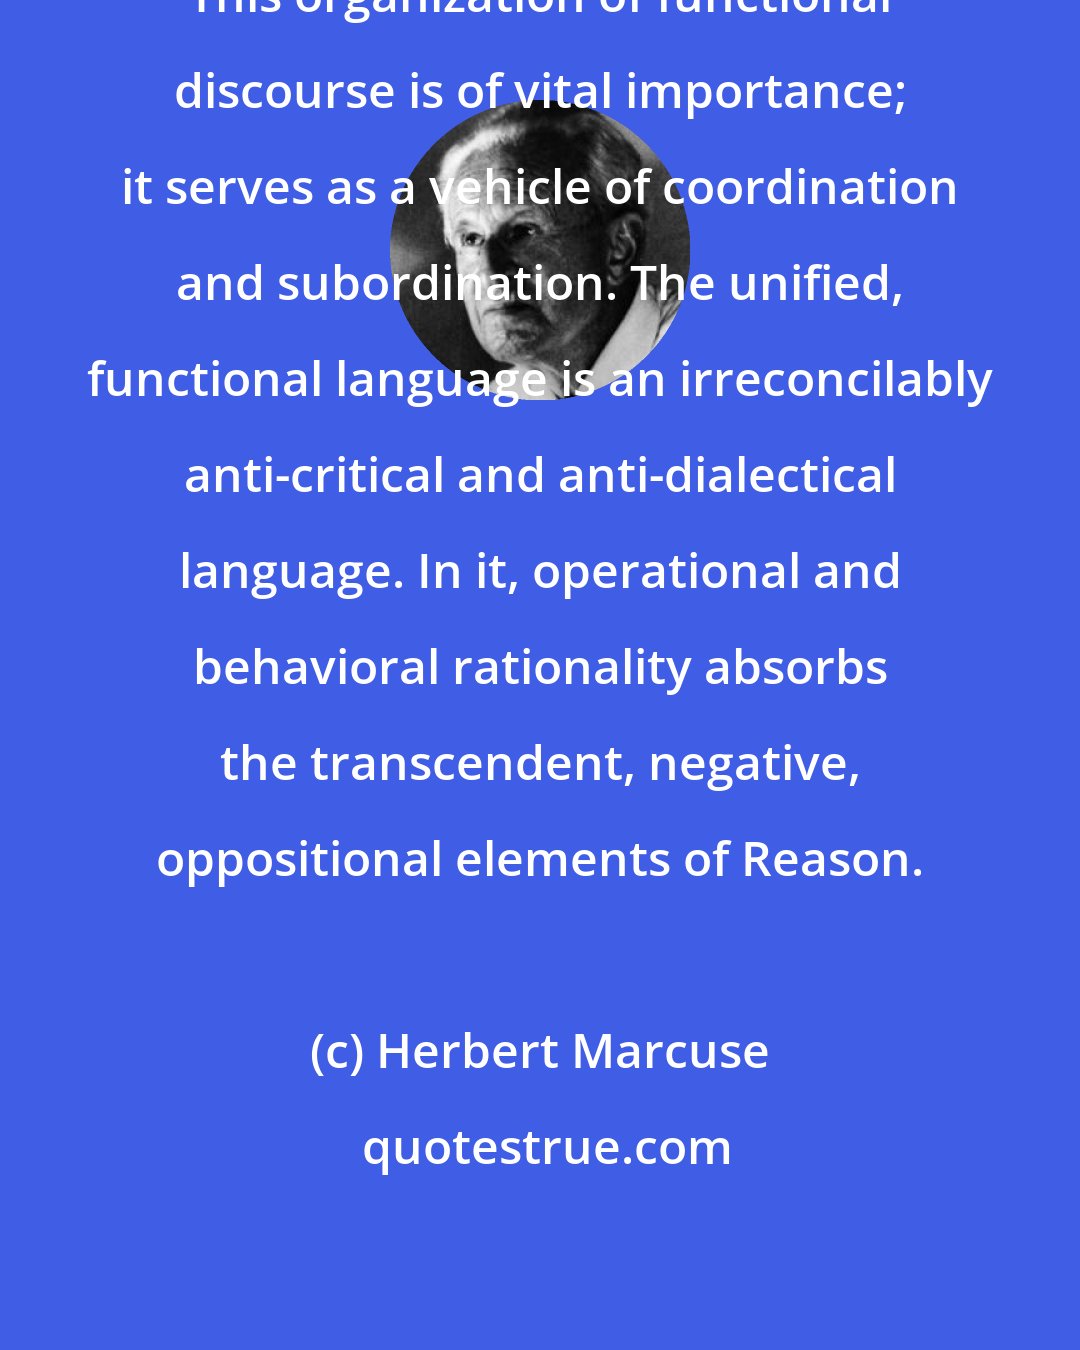 Herbert Marcuse: This organization of functional discourse is of vital importance; it serves as a vehicle of coordination and subordination. The unified, functional language is an irreconcilably anti-critical and anti-dialectical language. In it, operational and behavioral rationality absorbs the transcendent, negative, oppositional elements of Reason.